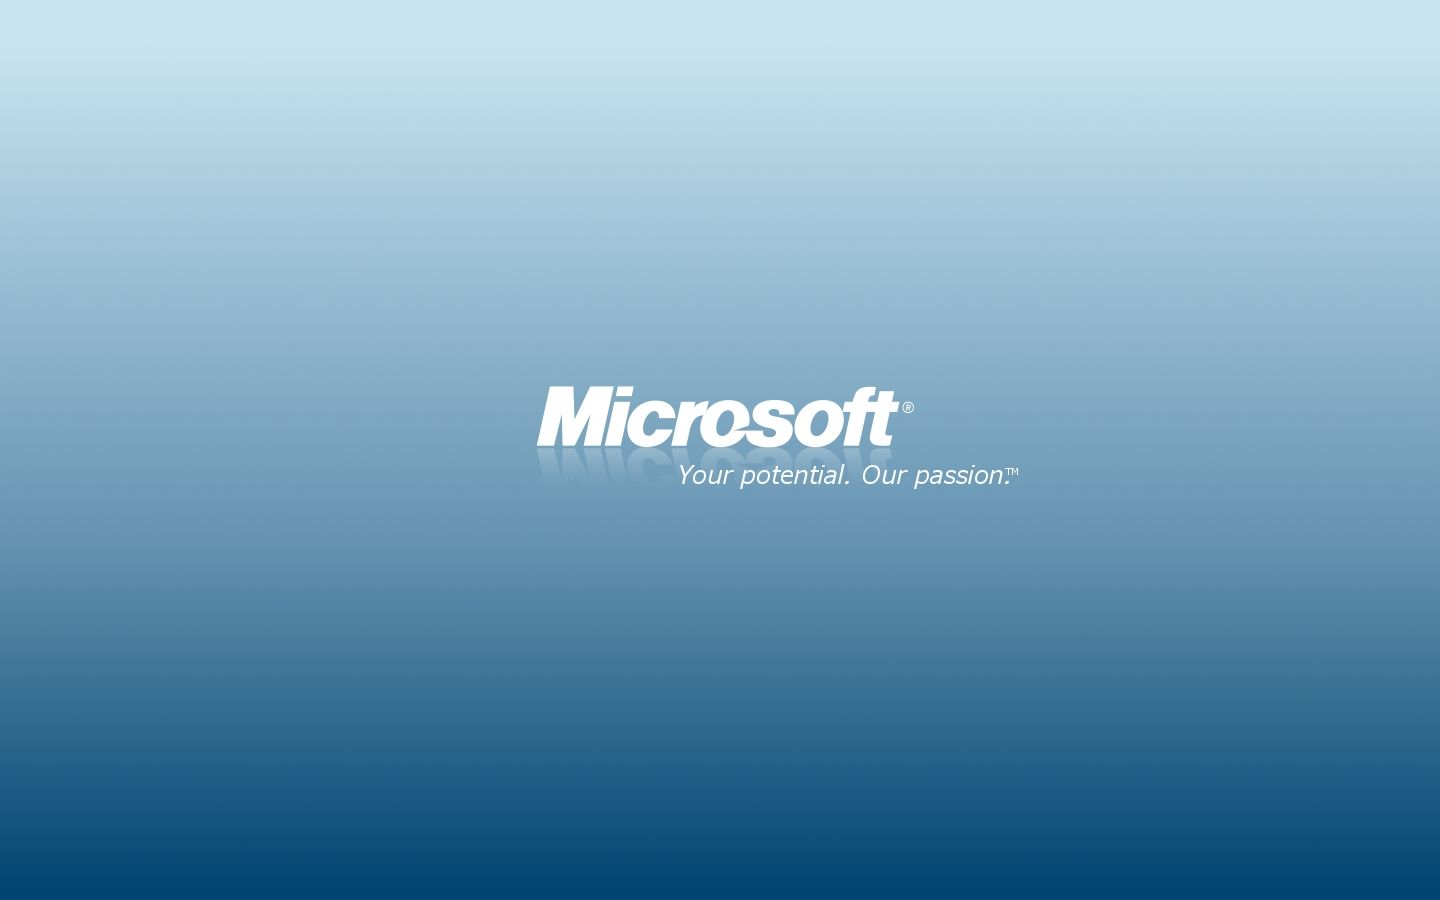 Awesome Microsoft Wallpaper | Full HD Pictures